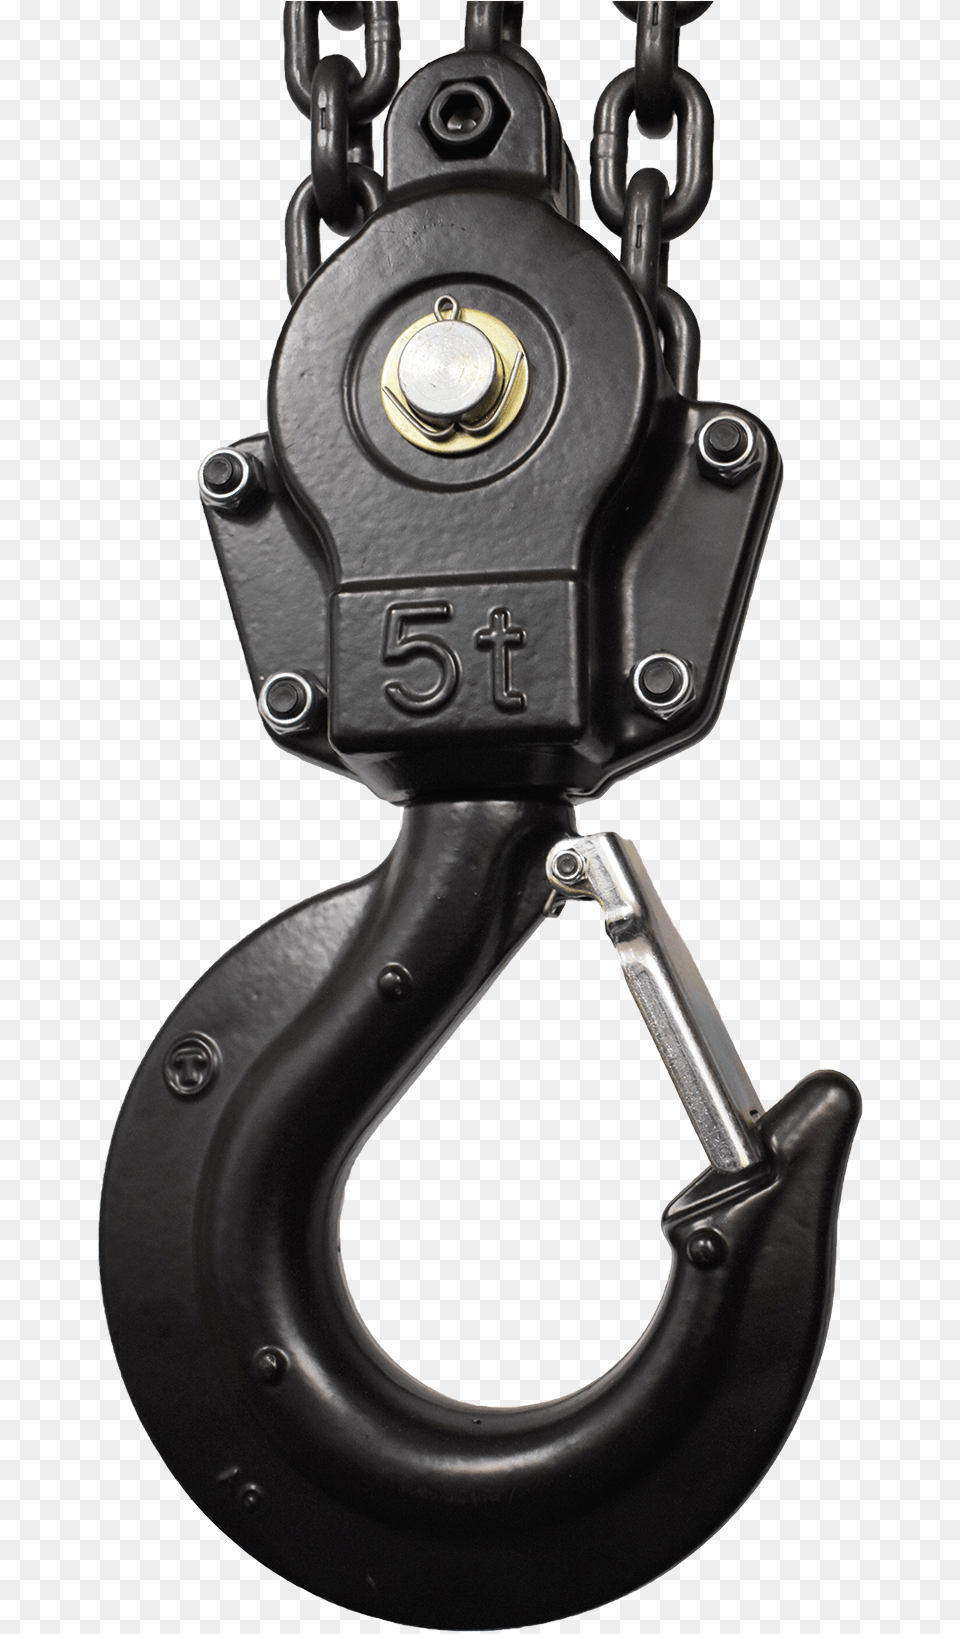 Tiger Tr7 Chain Block Image Strap, Electronics, Hardware, Hook Png